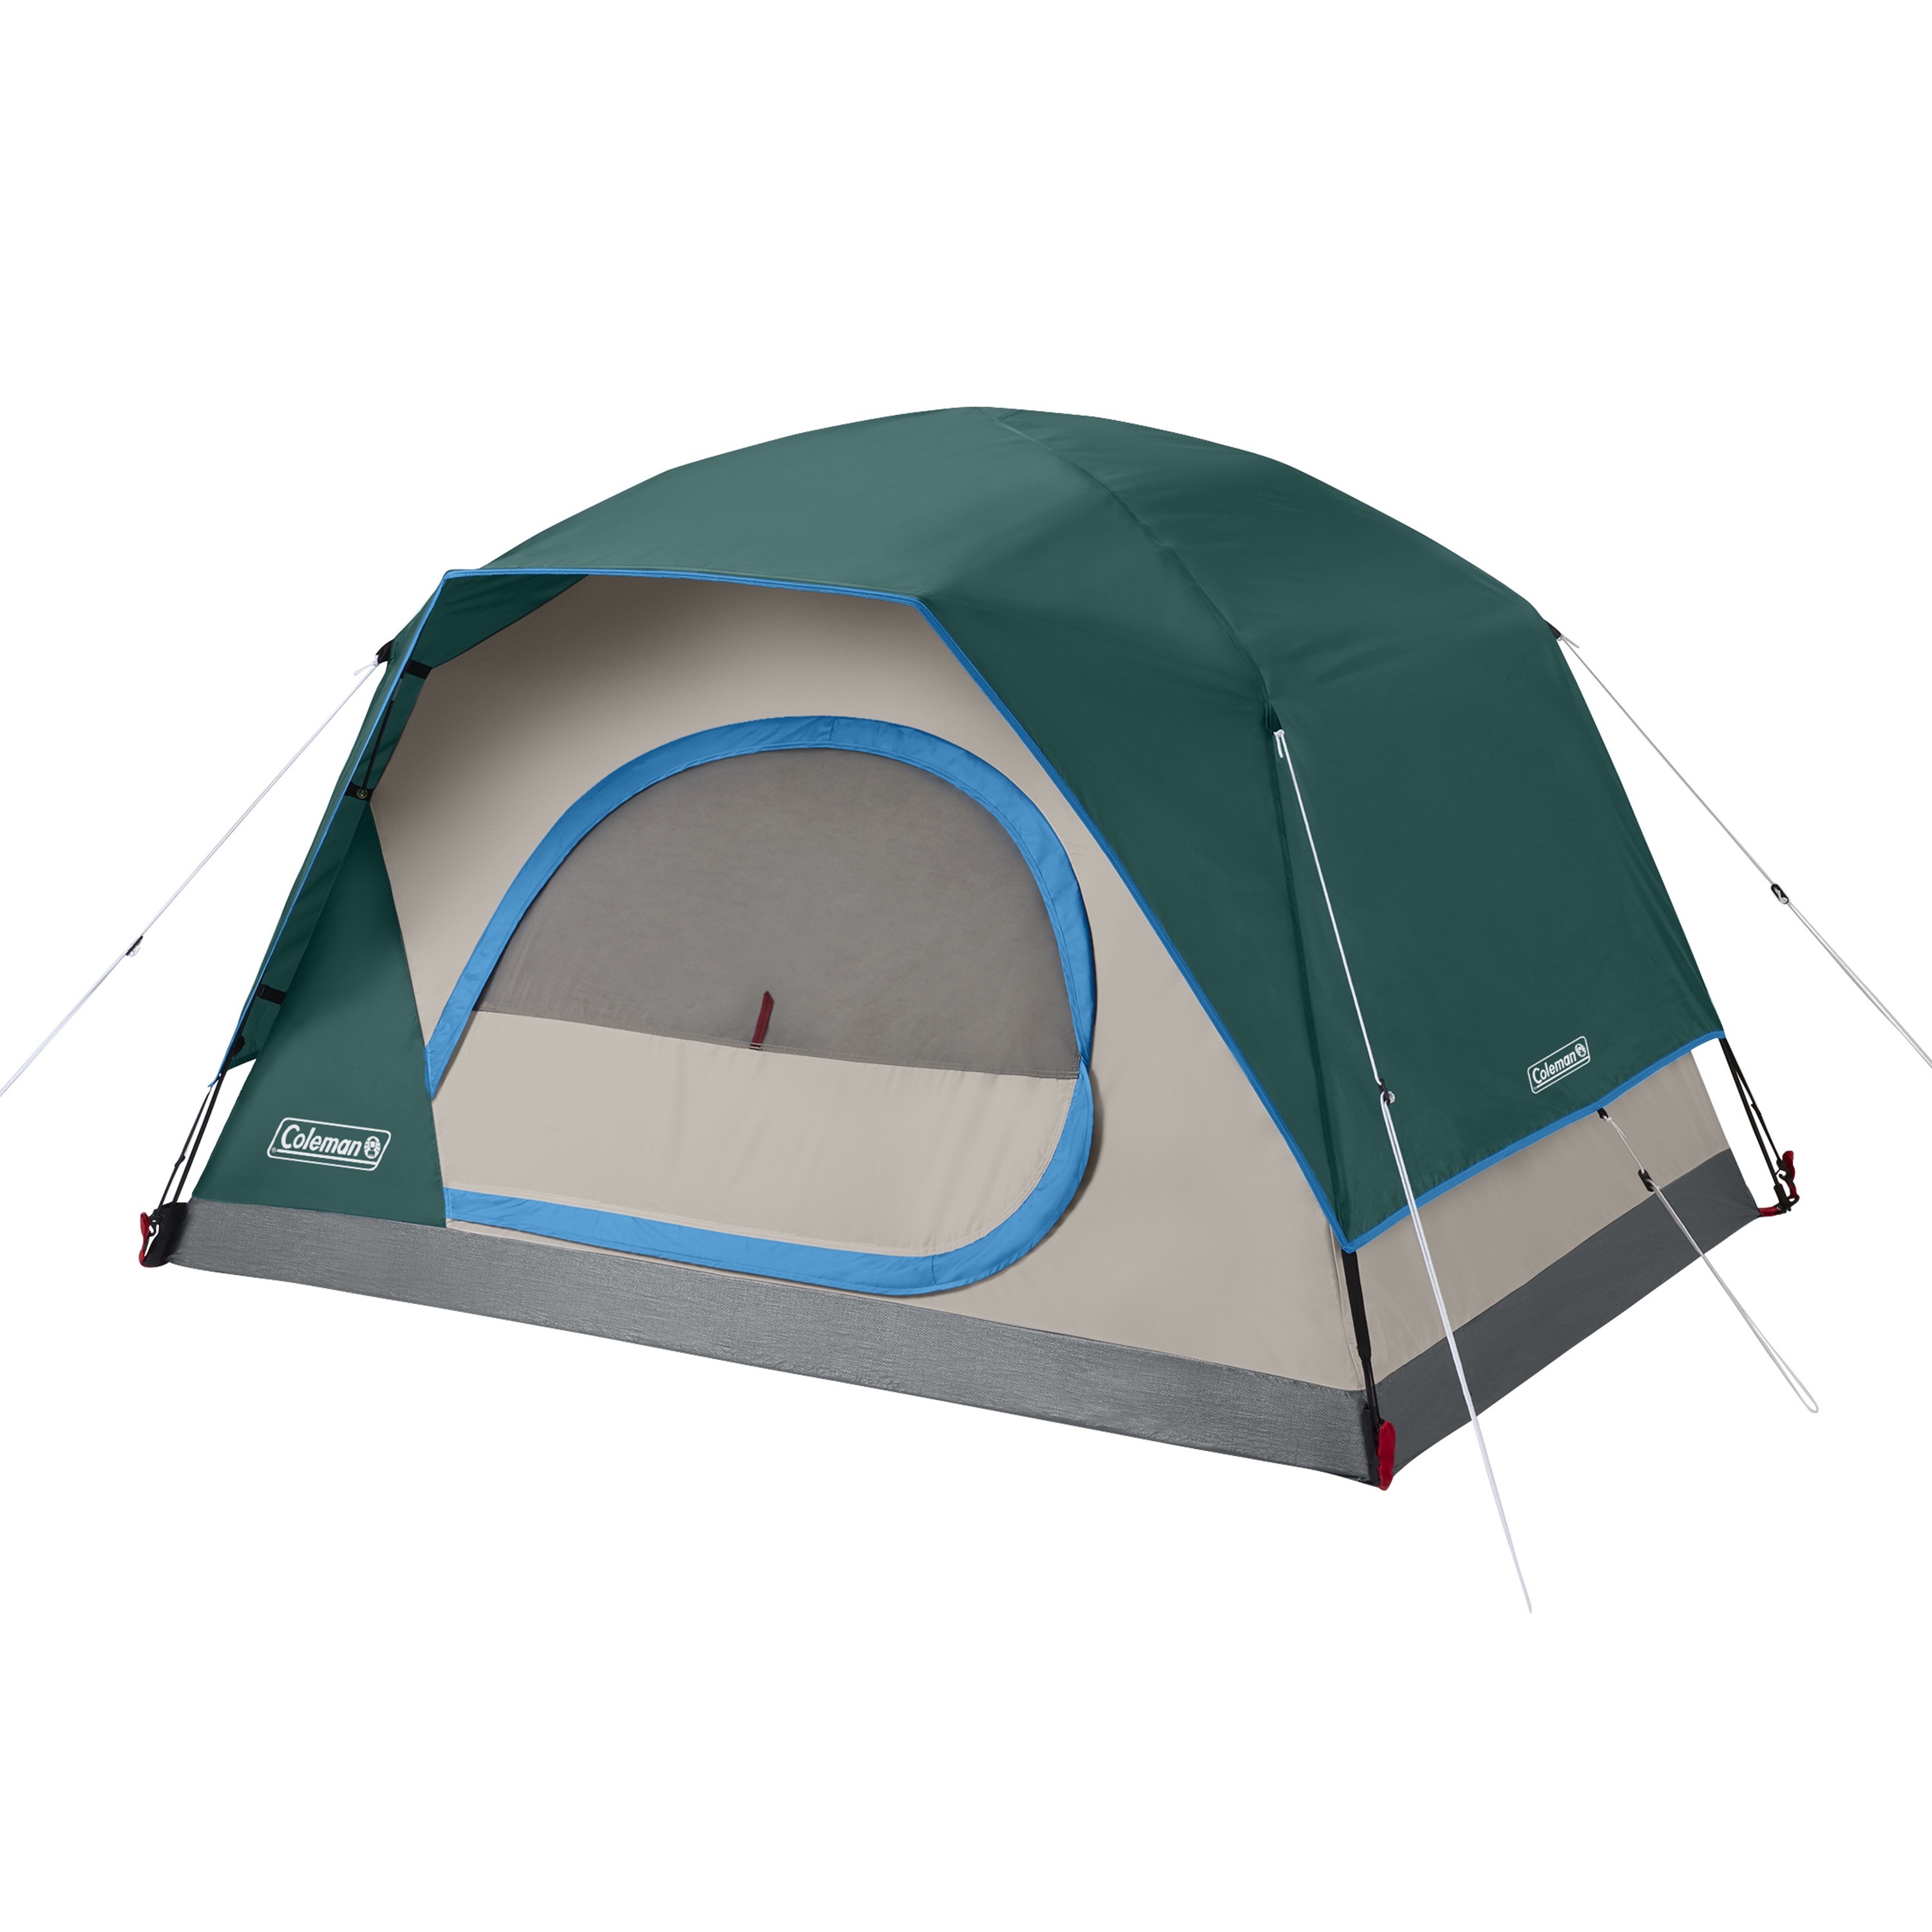 Coleman Camping Tent | 2 Person Skydome Tent, Evergreen - image 1 of 8